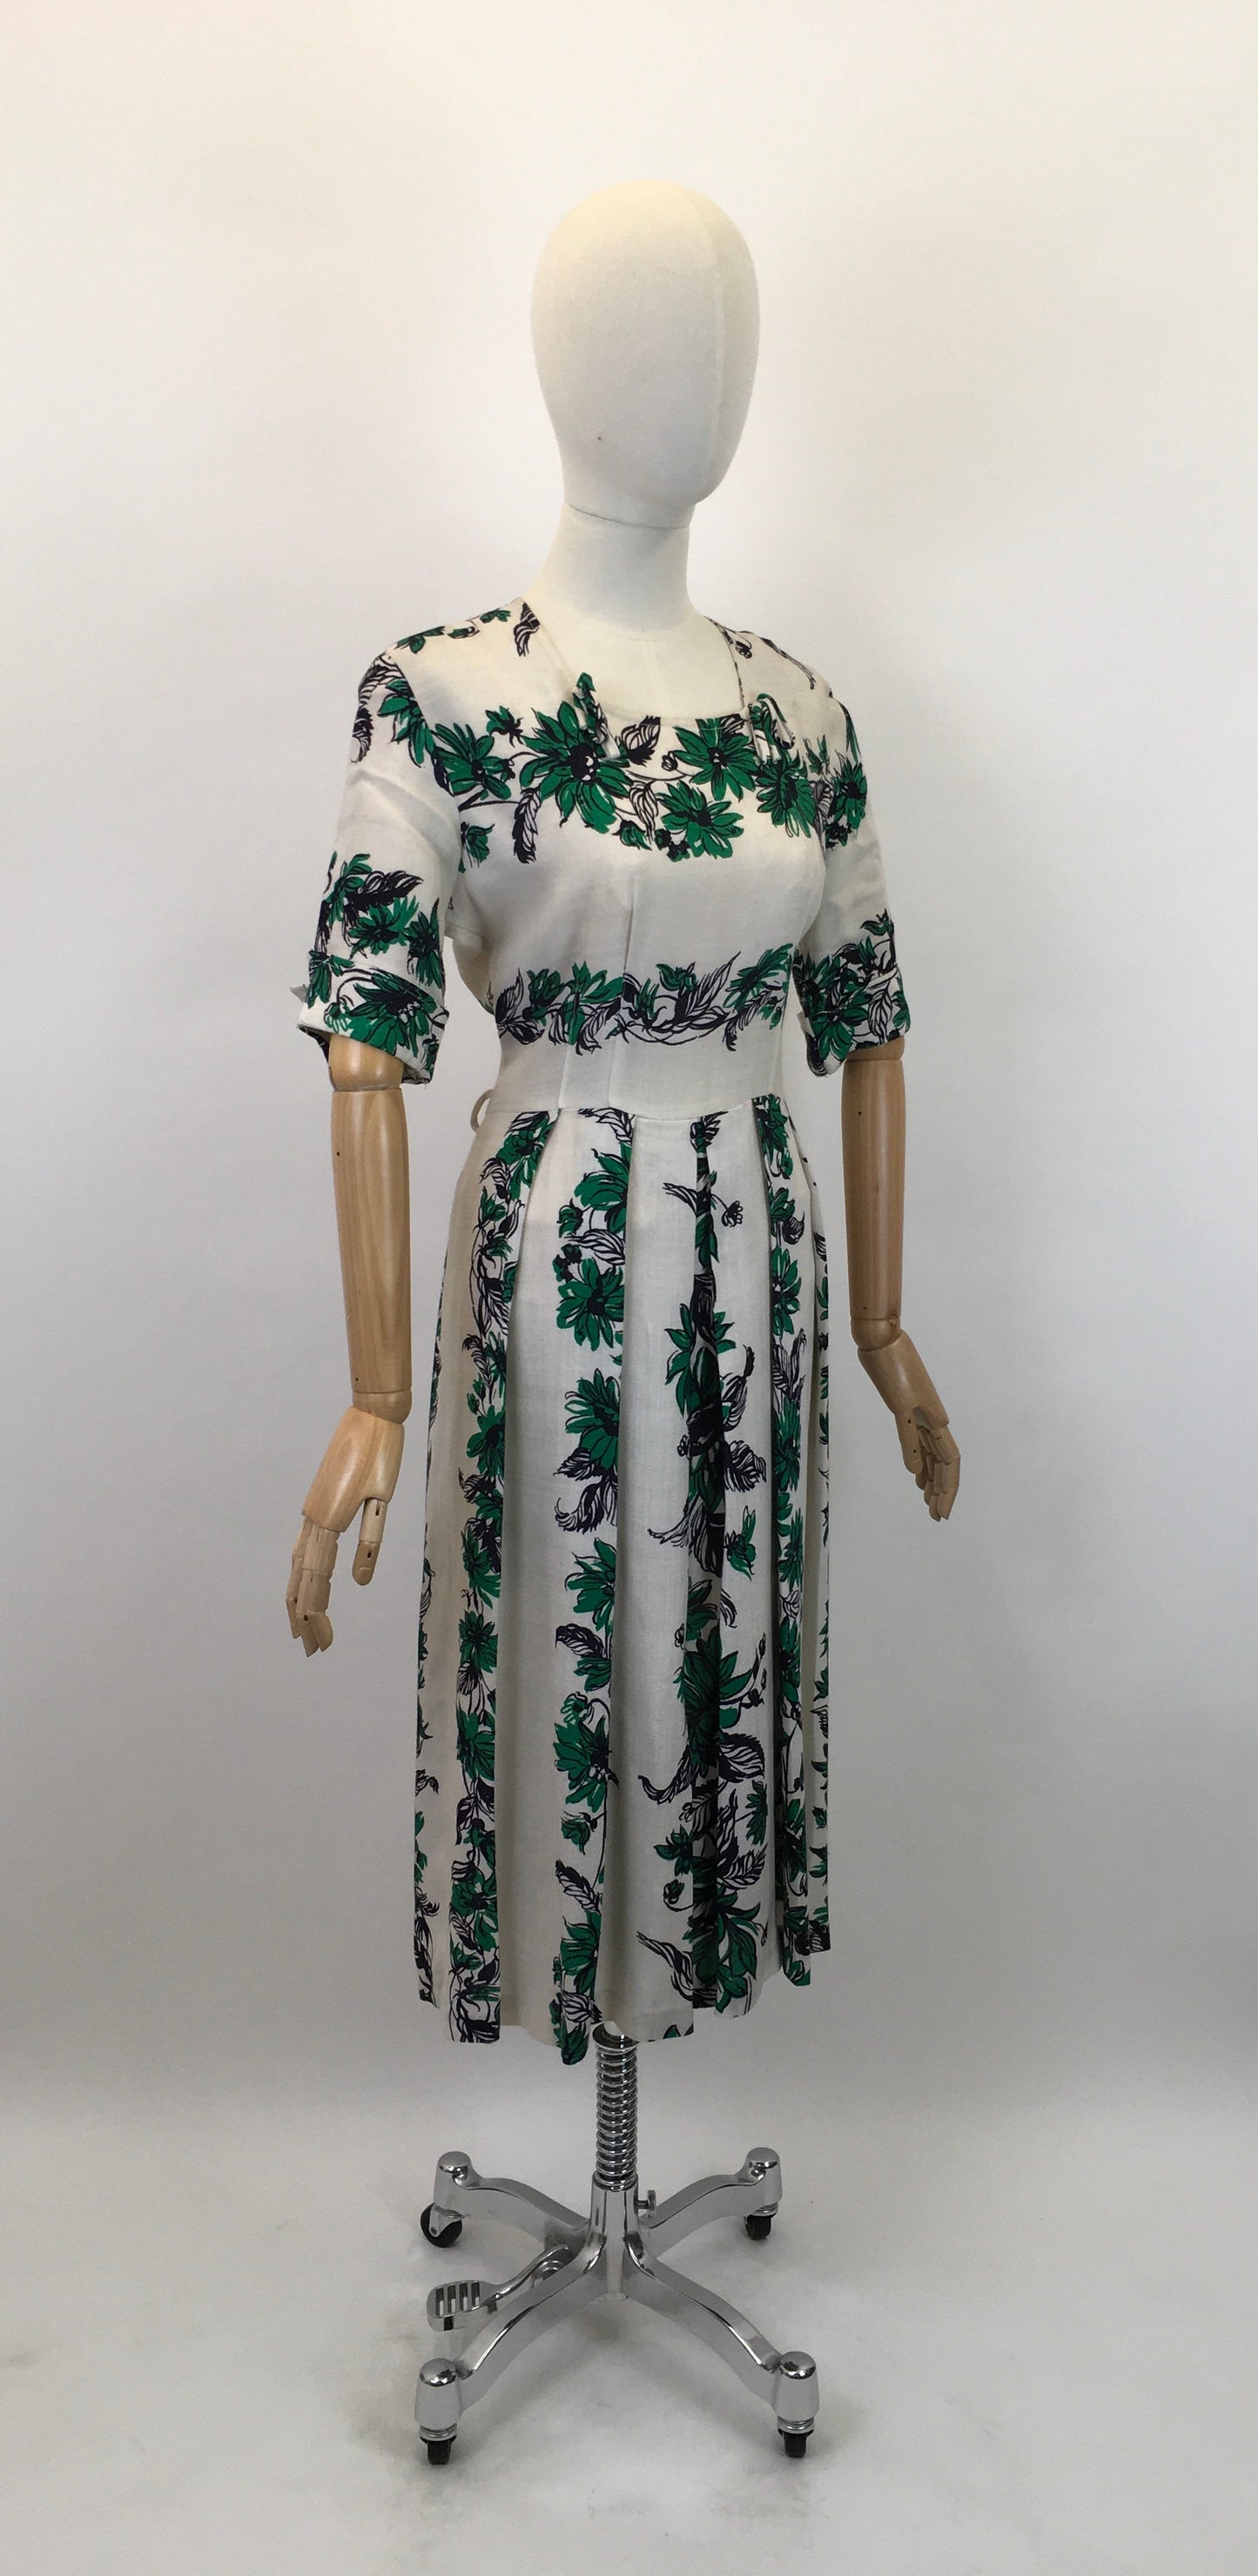 Original Stunning 1940's CC41 Utility Day Dress - In A Floral Moygashal Linen in Green, White & Black